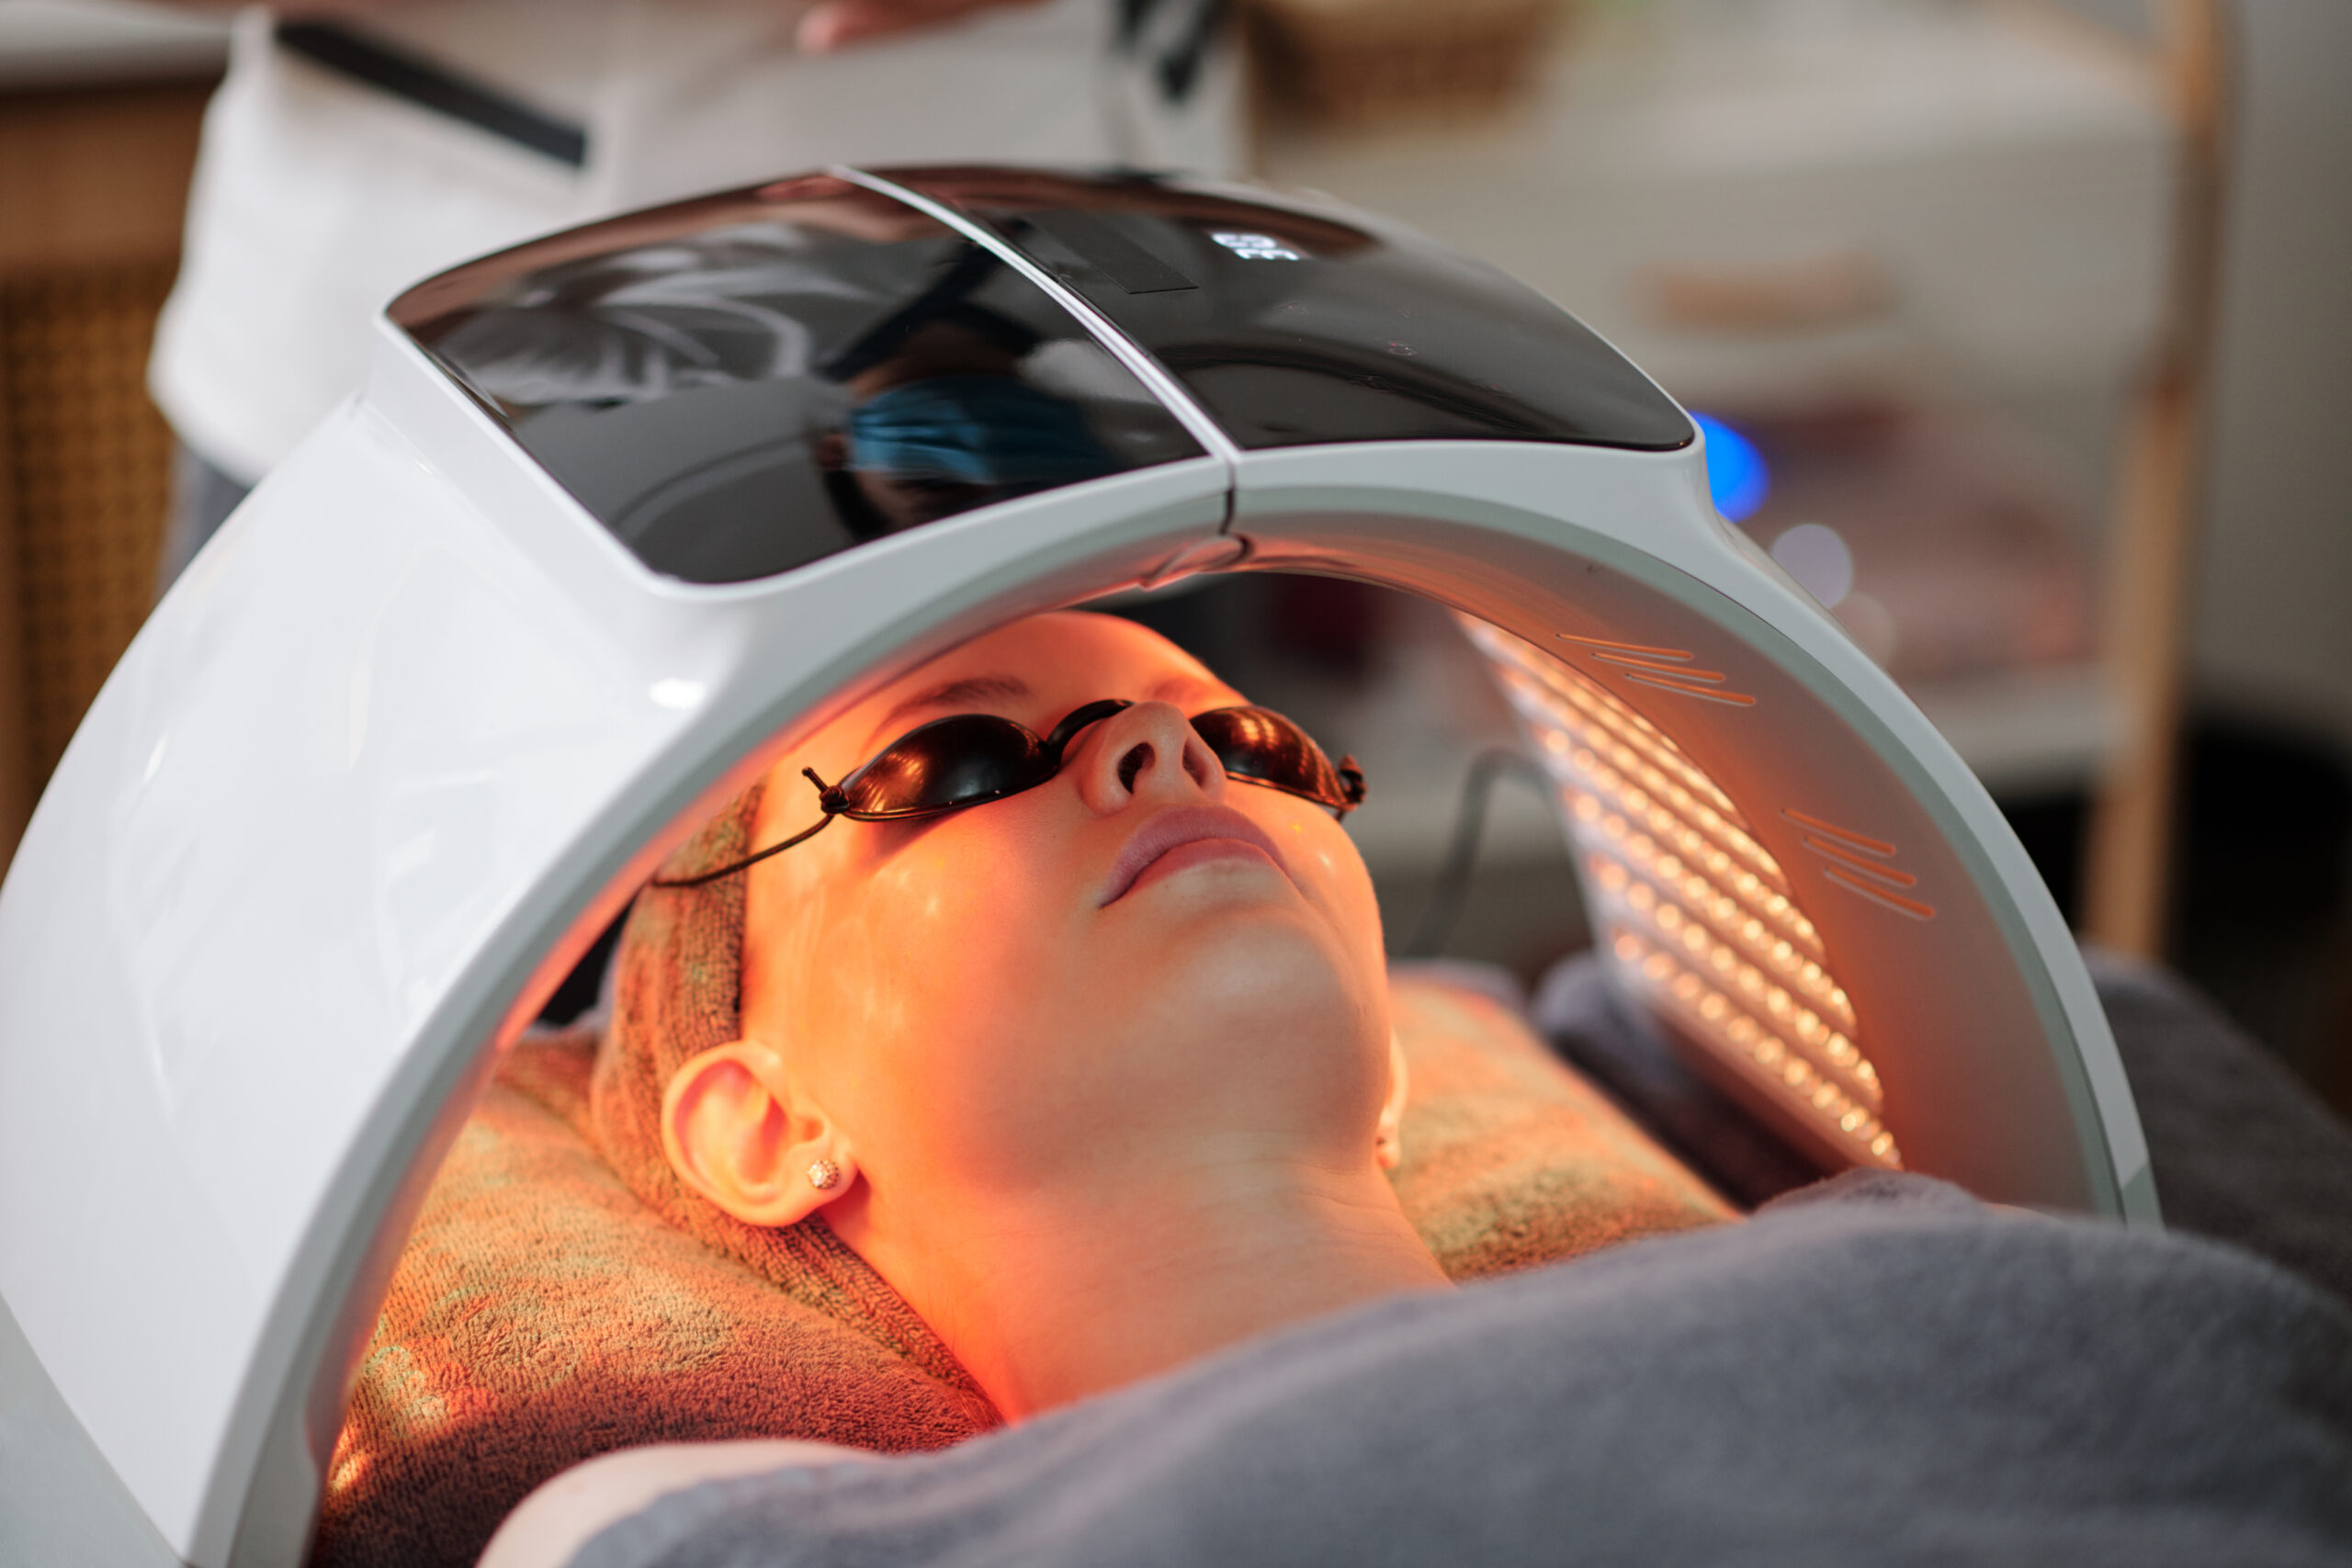 LED Light Therapy: Understanding the Science and Applications of LED Lights in Skincare and Wellness